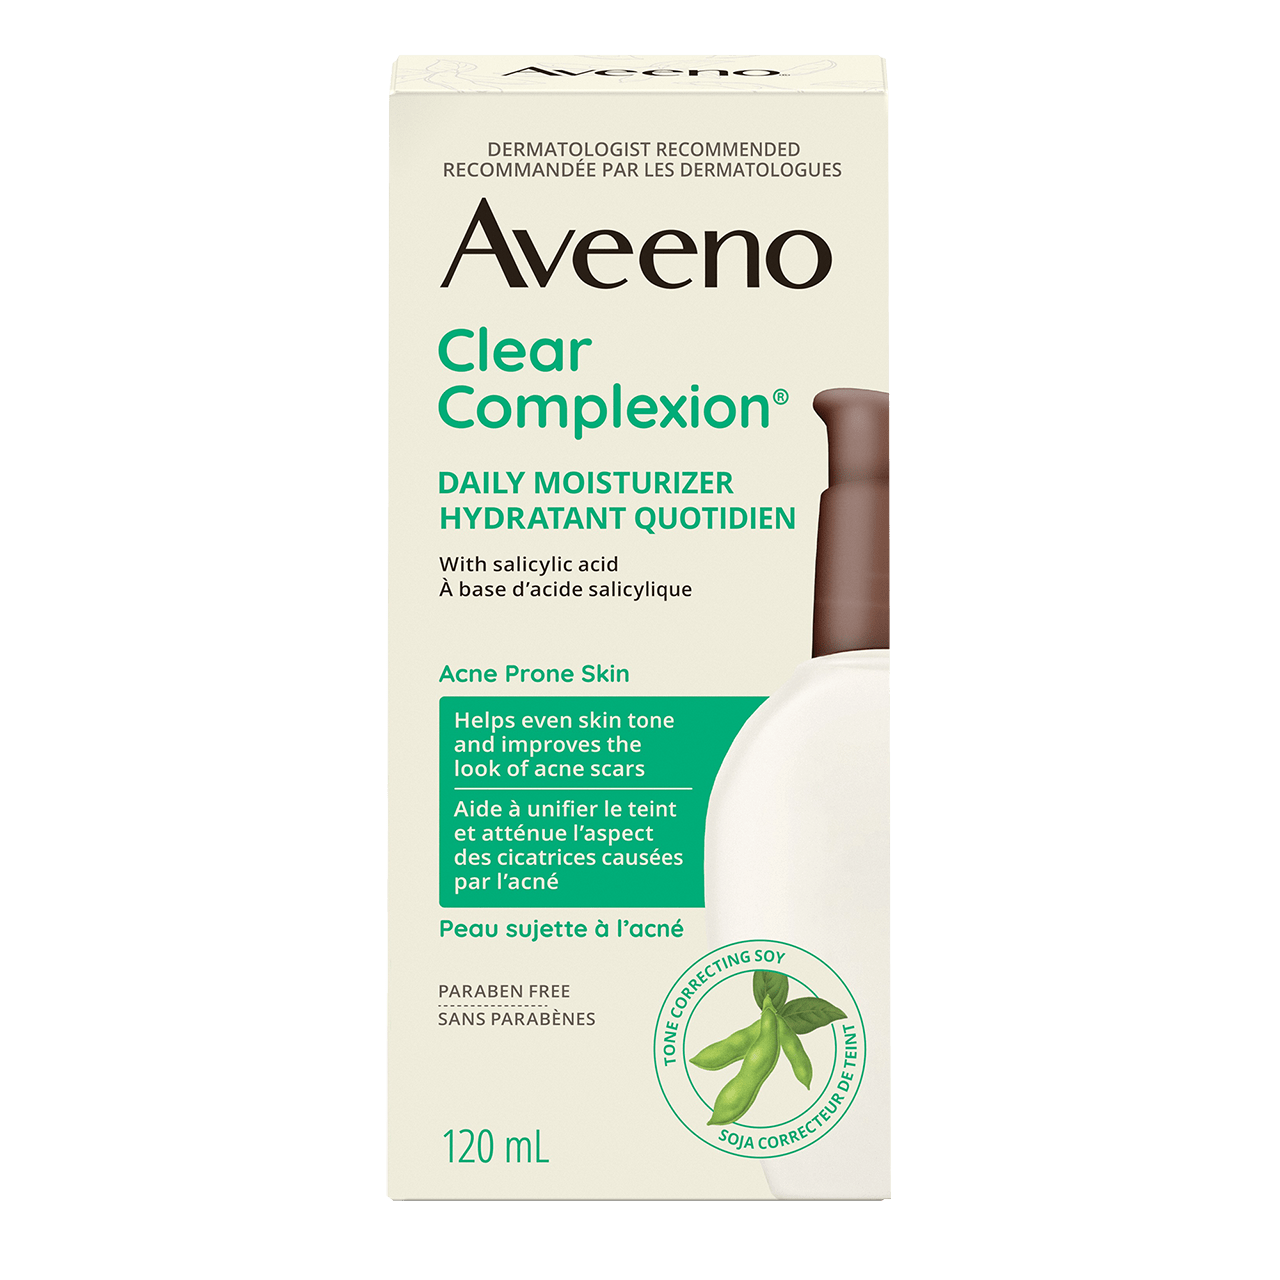 AVEENO® Clear Complexion Daily Moisturizer with Salicylic Acid packaging